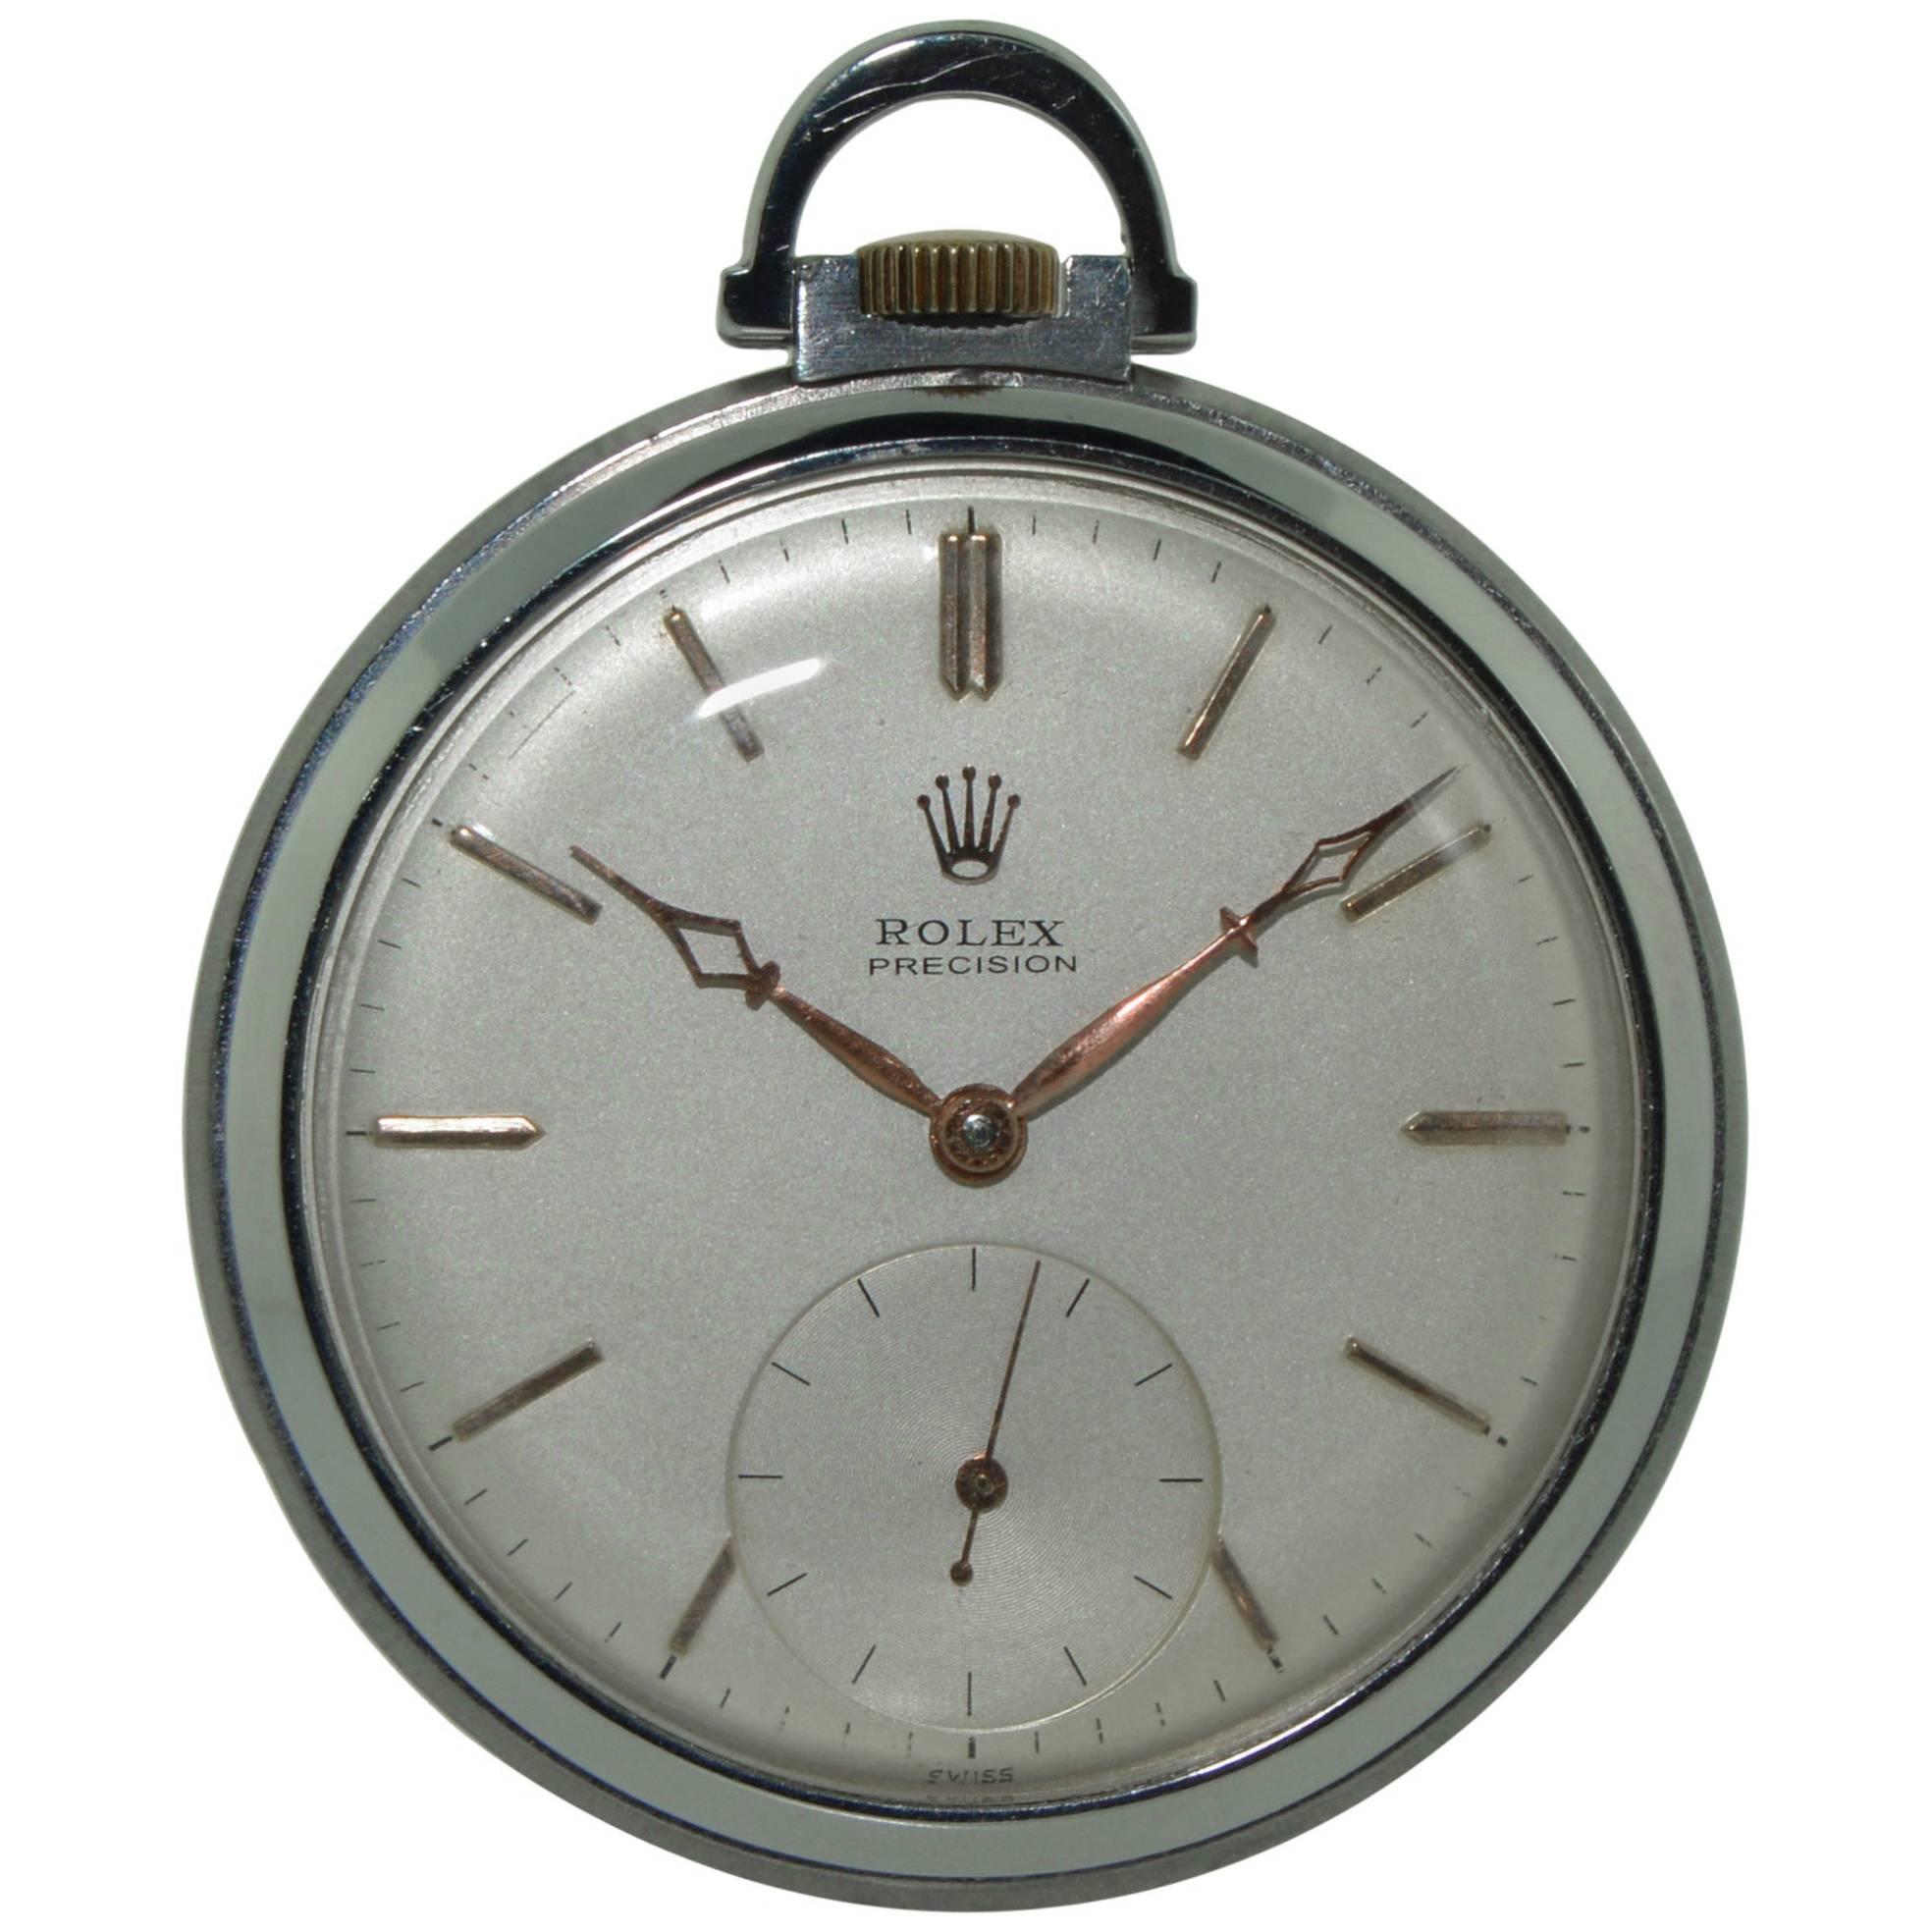 Rolex Stainless Steel High Grade Open Faced Manual Pocket Watch with Chain